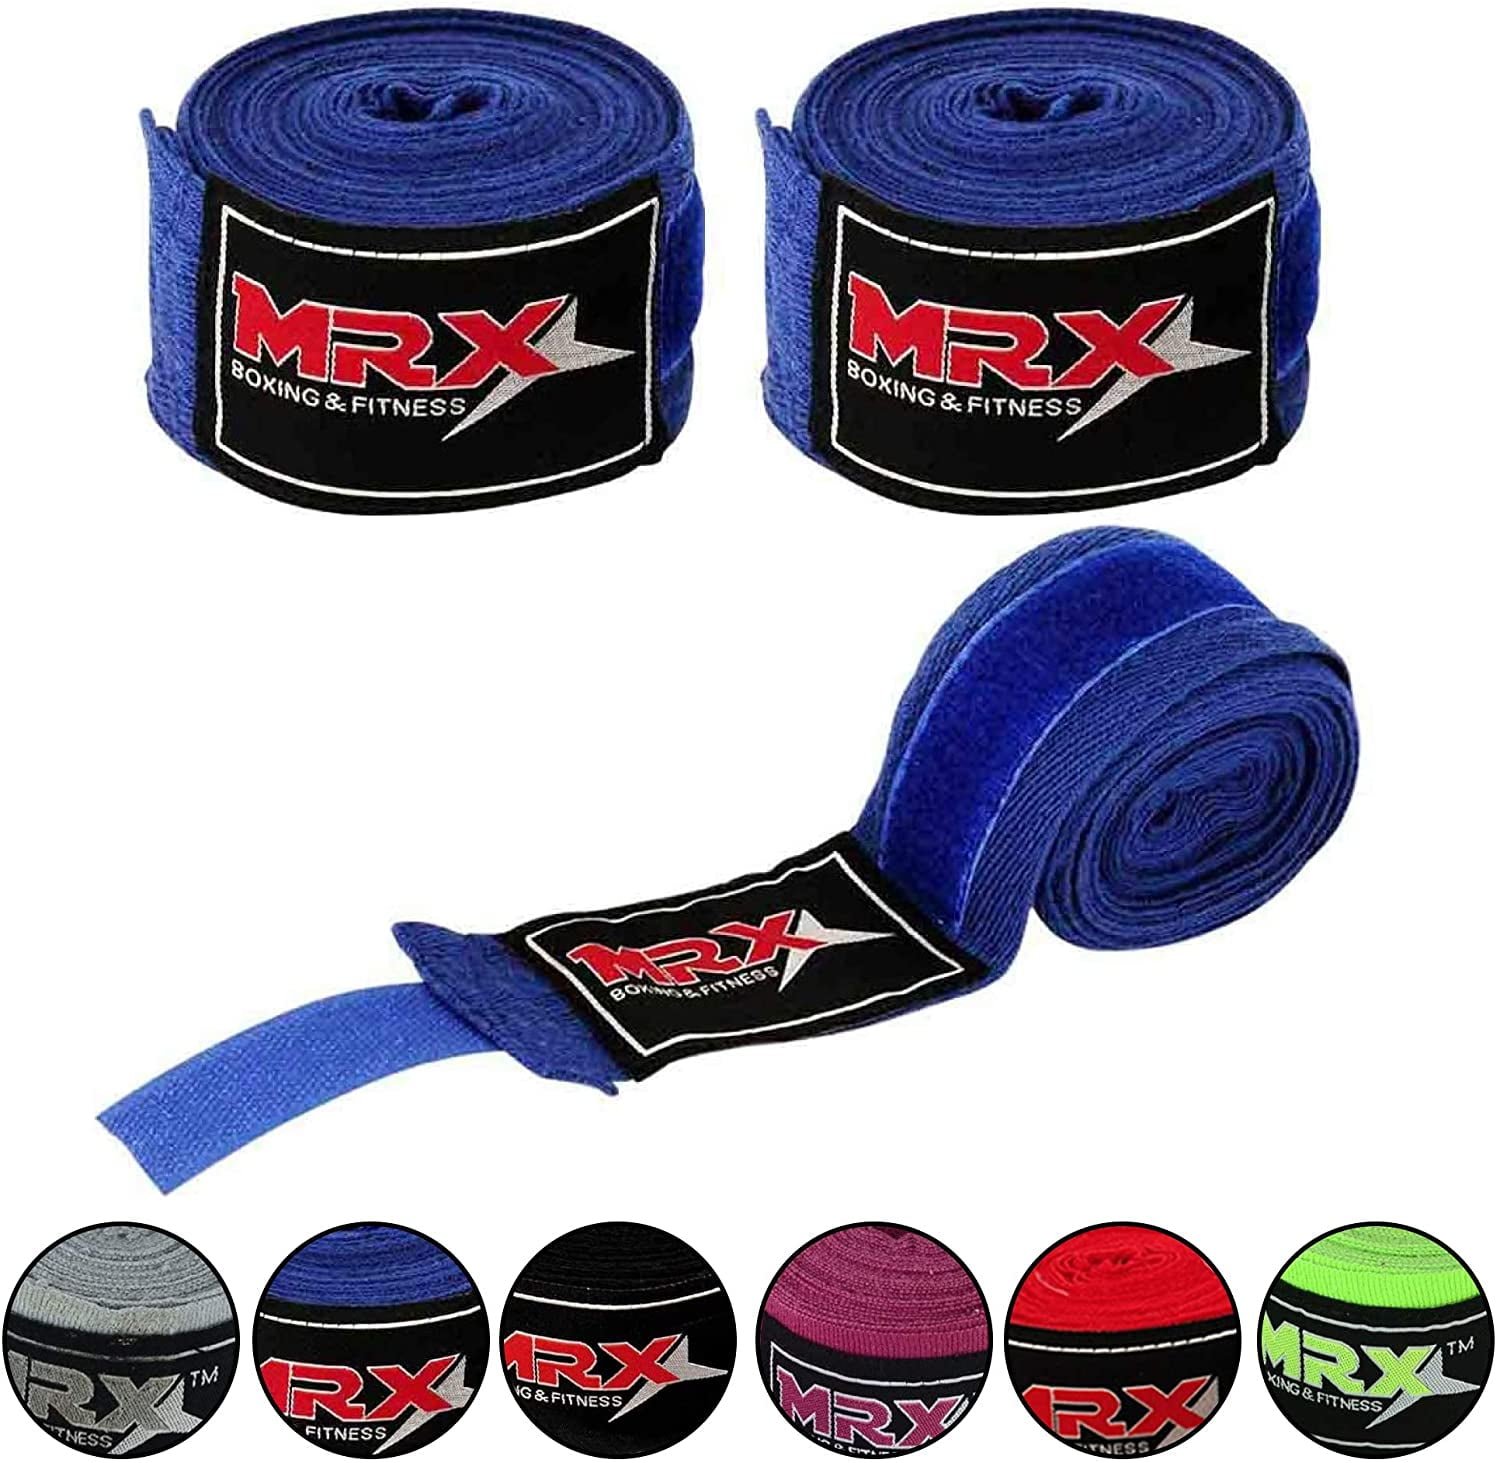 KIDS YOUTH JUNIOR BLACK HAND WRAPS WRIST SUPPORTS FOR MUAY THAI SPORTS TRAINING 